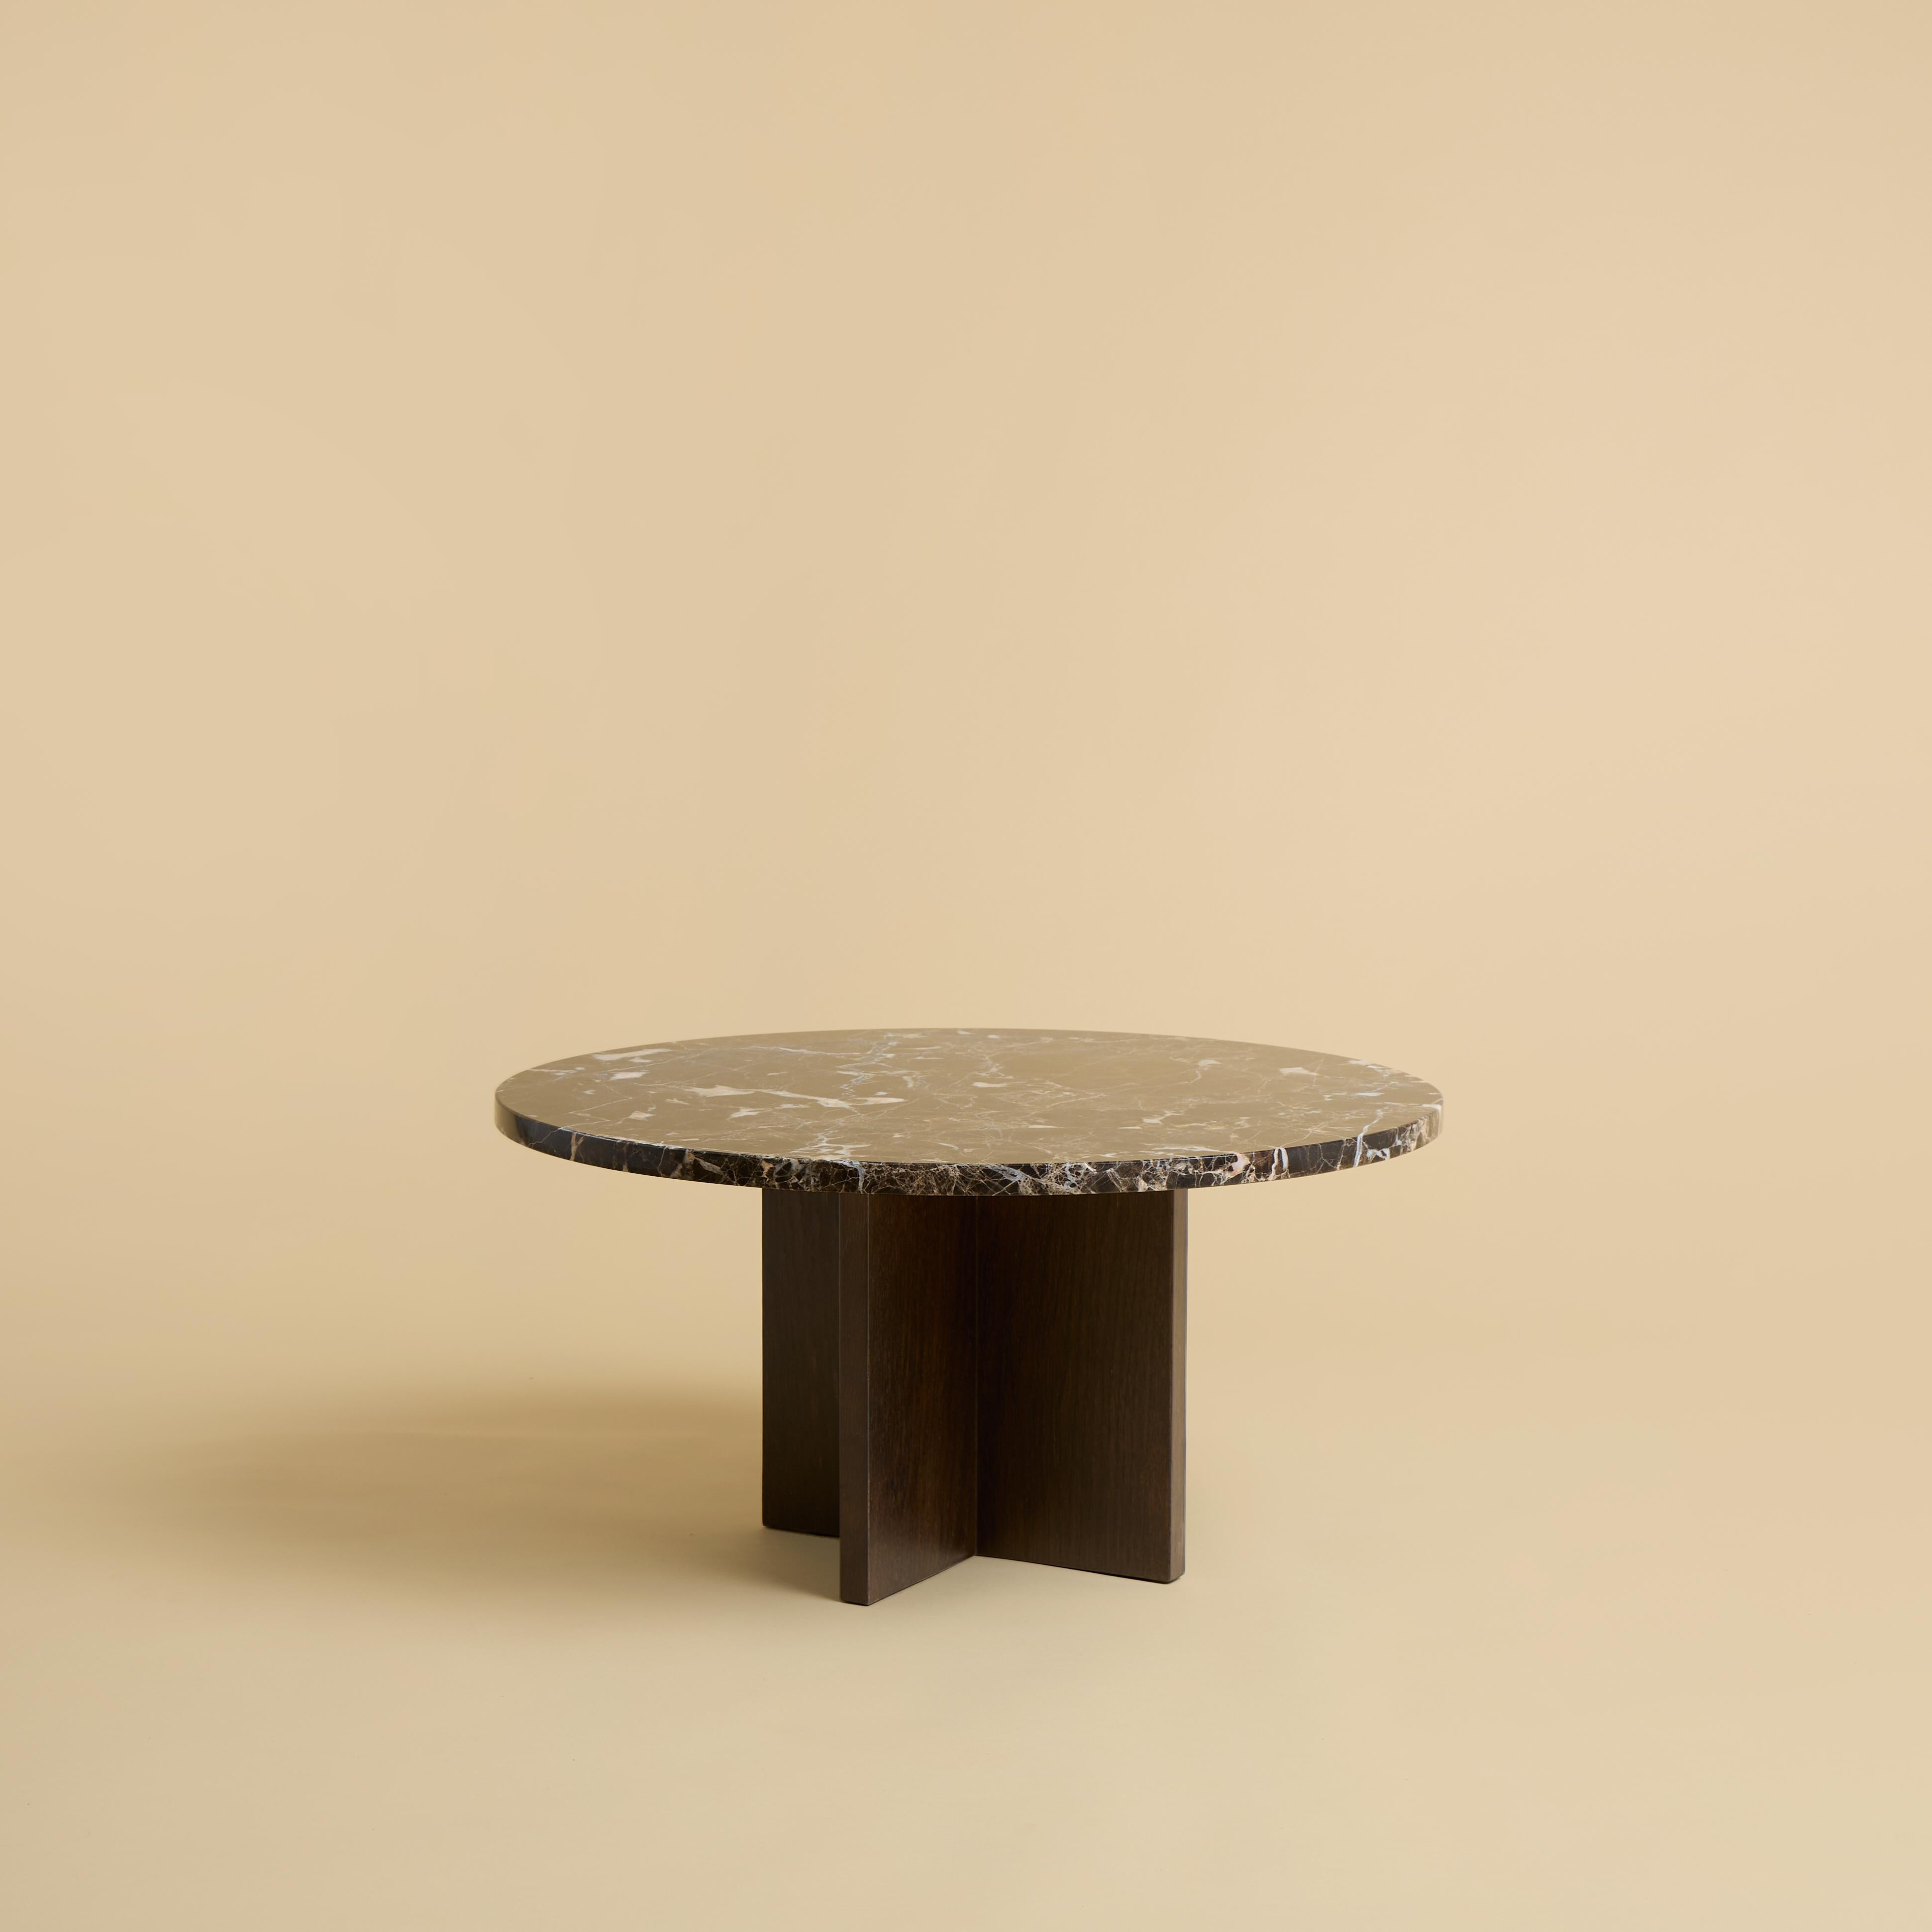 The Tinian coffee table is produced with an oak wood base and an Emperador Dark marble top. The top is circular and 60cm in diameter, while the base is obtained by gluing oak planks perpendicular to each other.
The piece is designed by Lebanto and